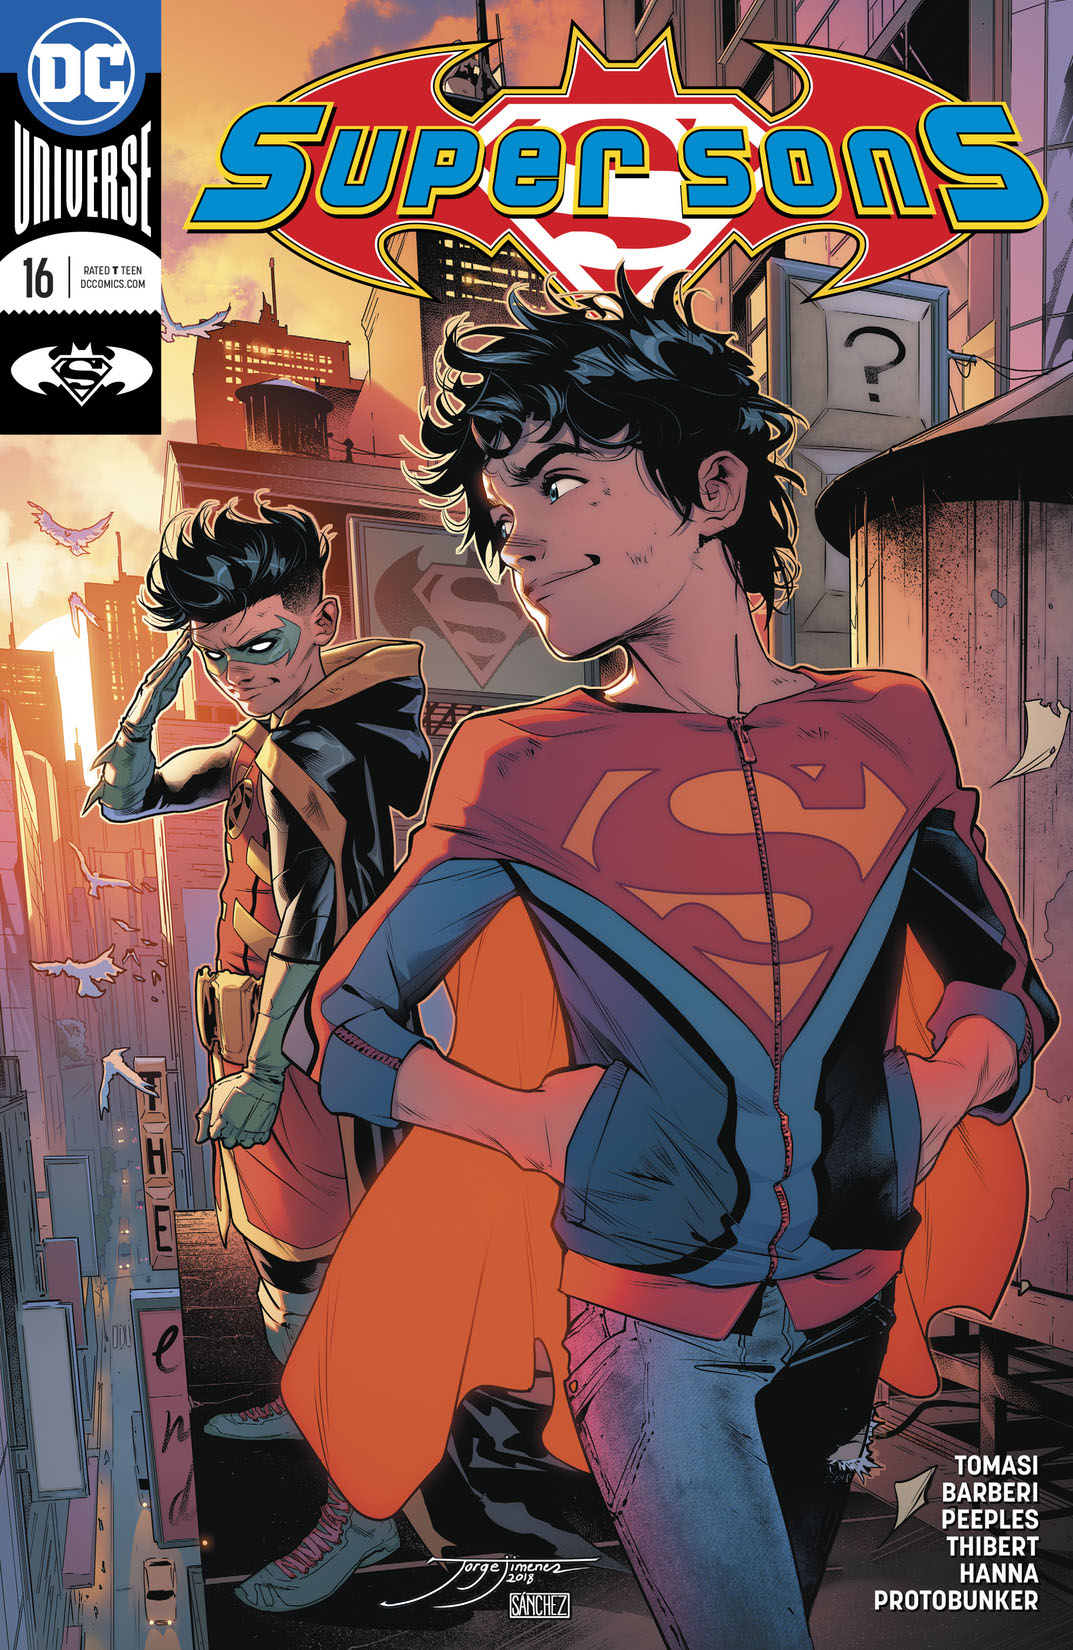 Super Sons (2017-) #16 preview images